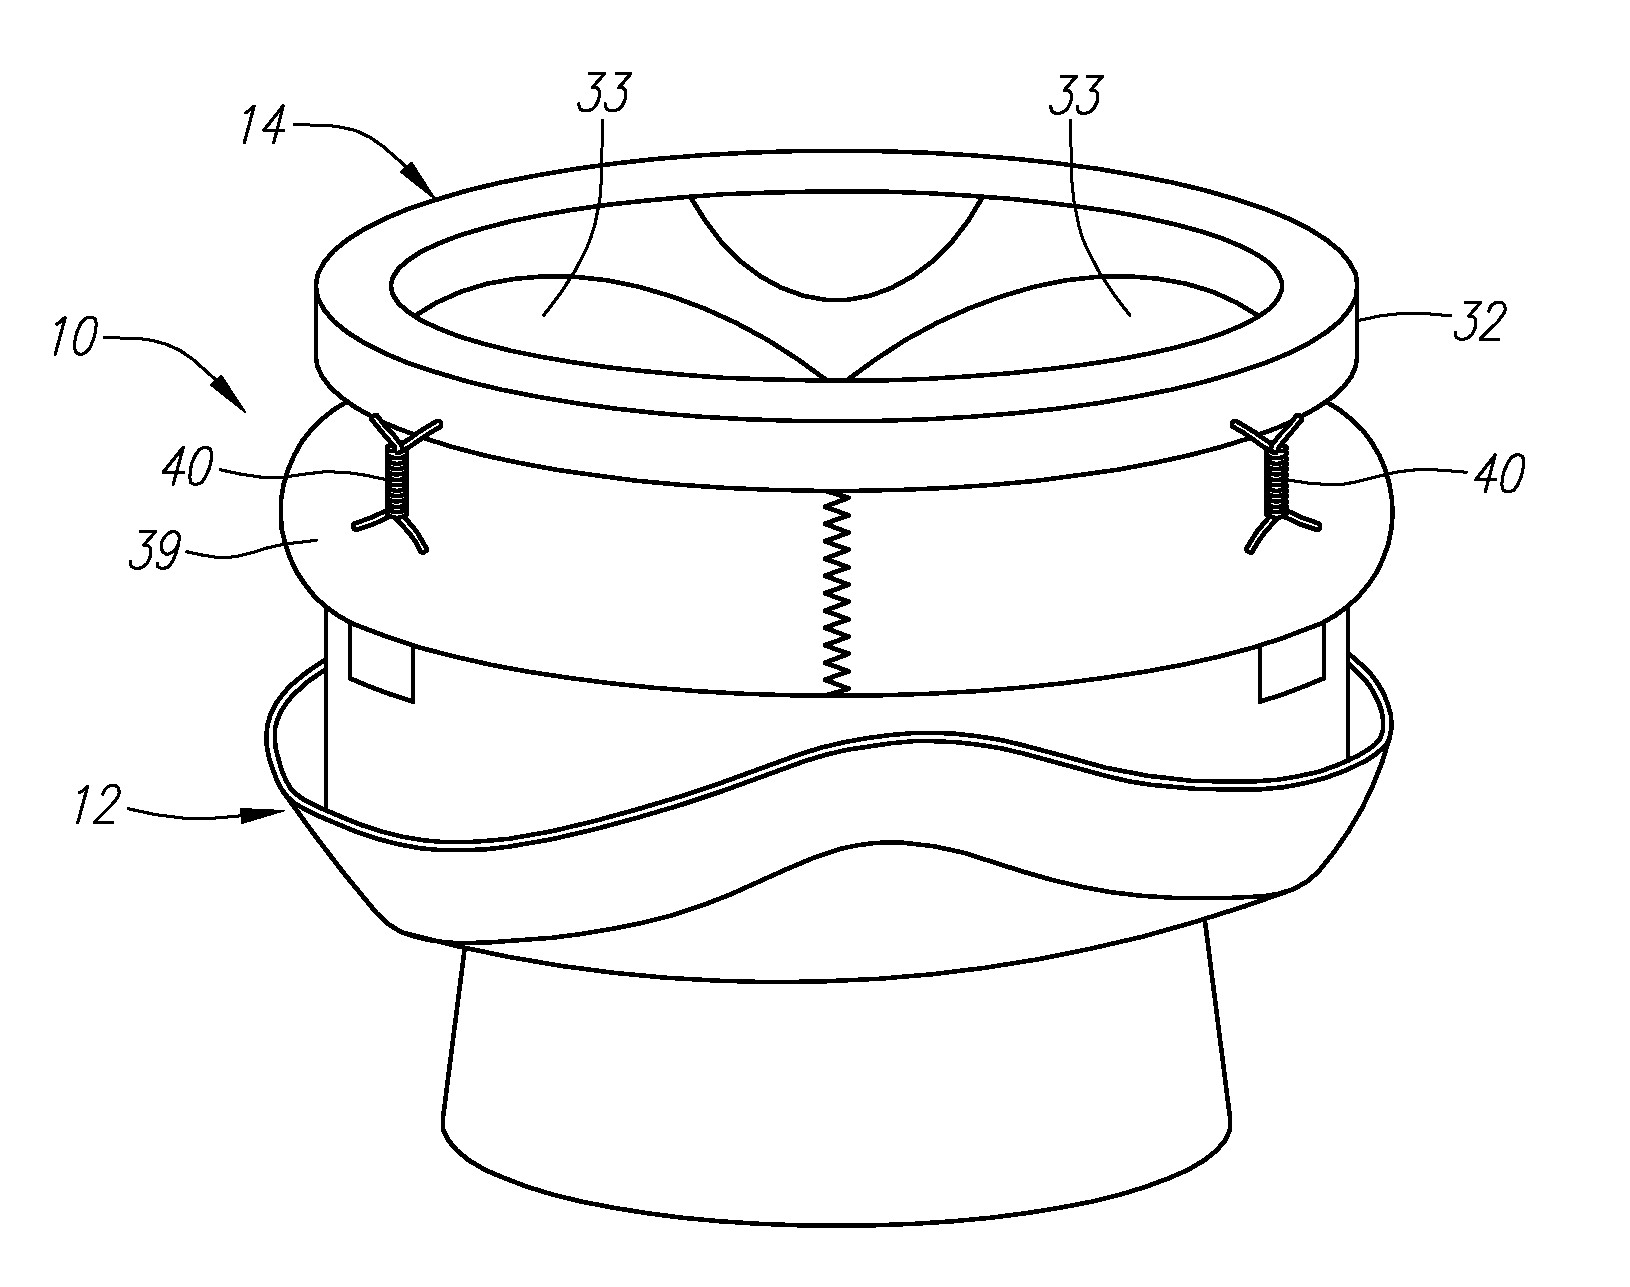 Gasket with collar for prosthetic heart valves and methods for using them